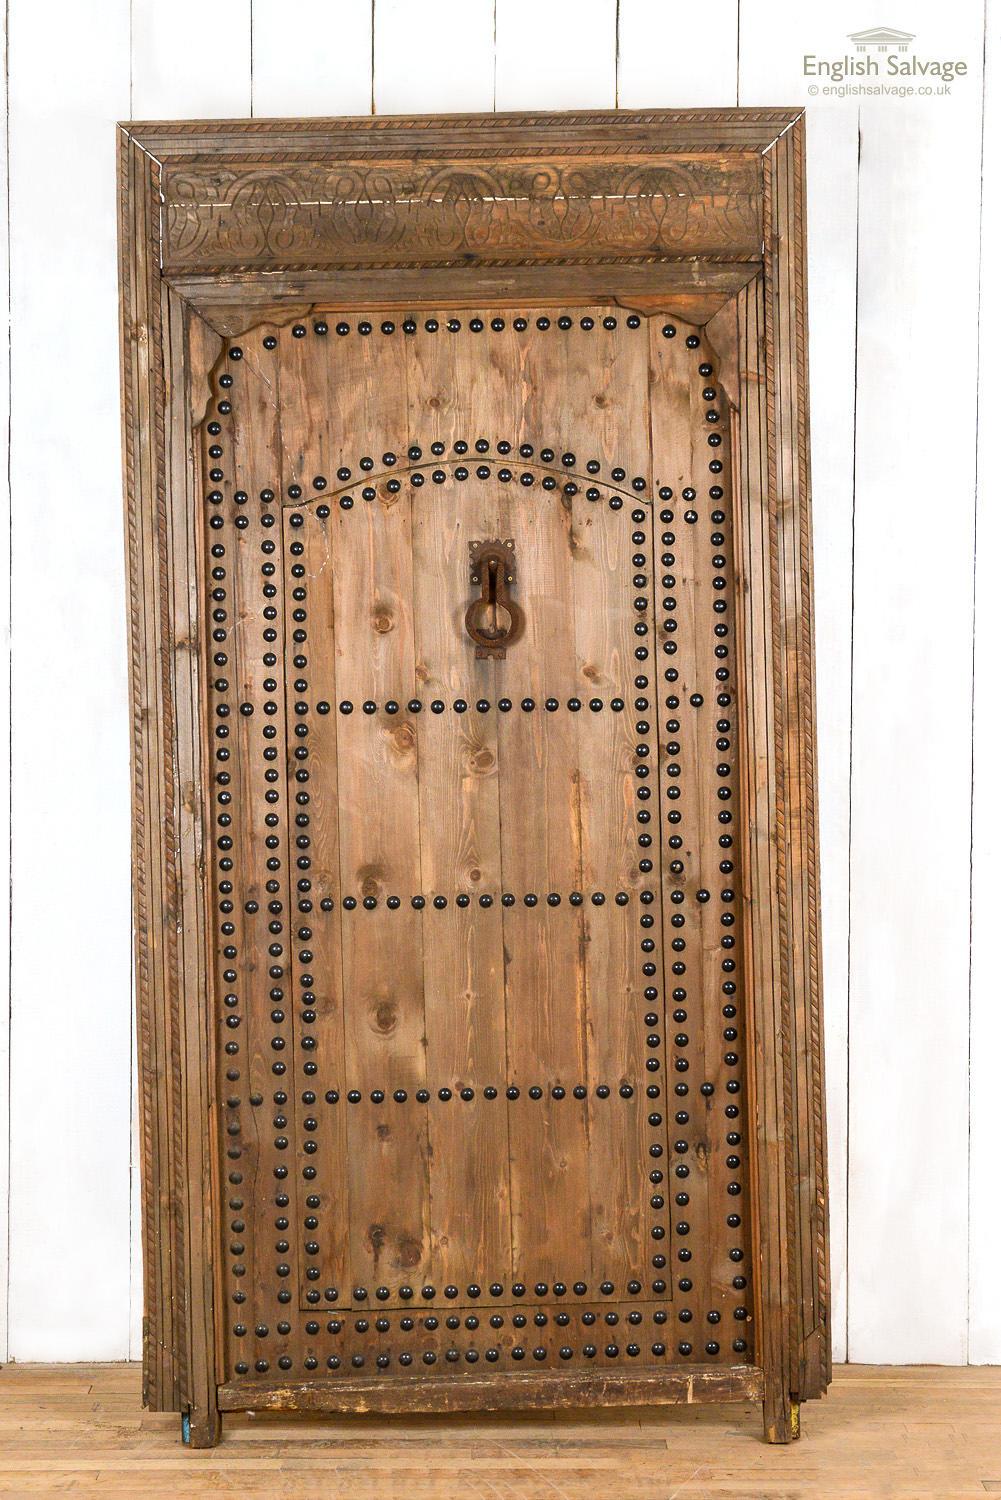 Old Moroccan door with a wicket gate / Judas door in a carved frame. Metal studs and old door knocker. One side of the door is plain. Some splits and scuffs with separation to part of the frame. Frame measures: 124cm x 228cm x 10cm. Outer door